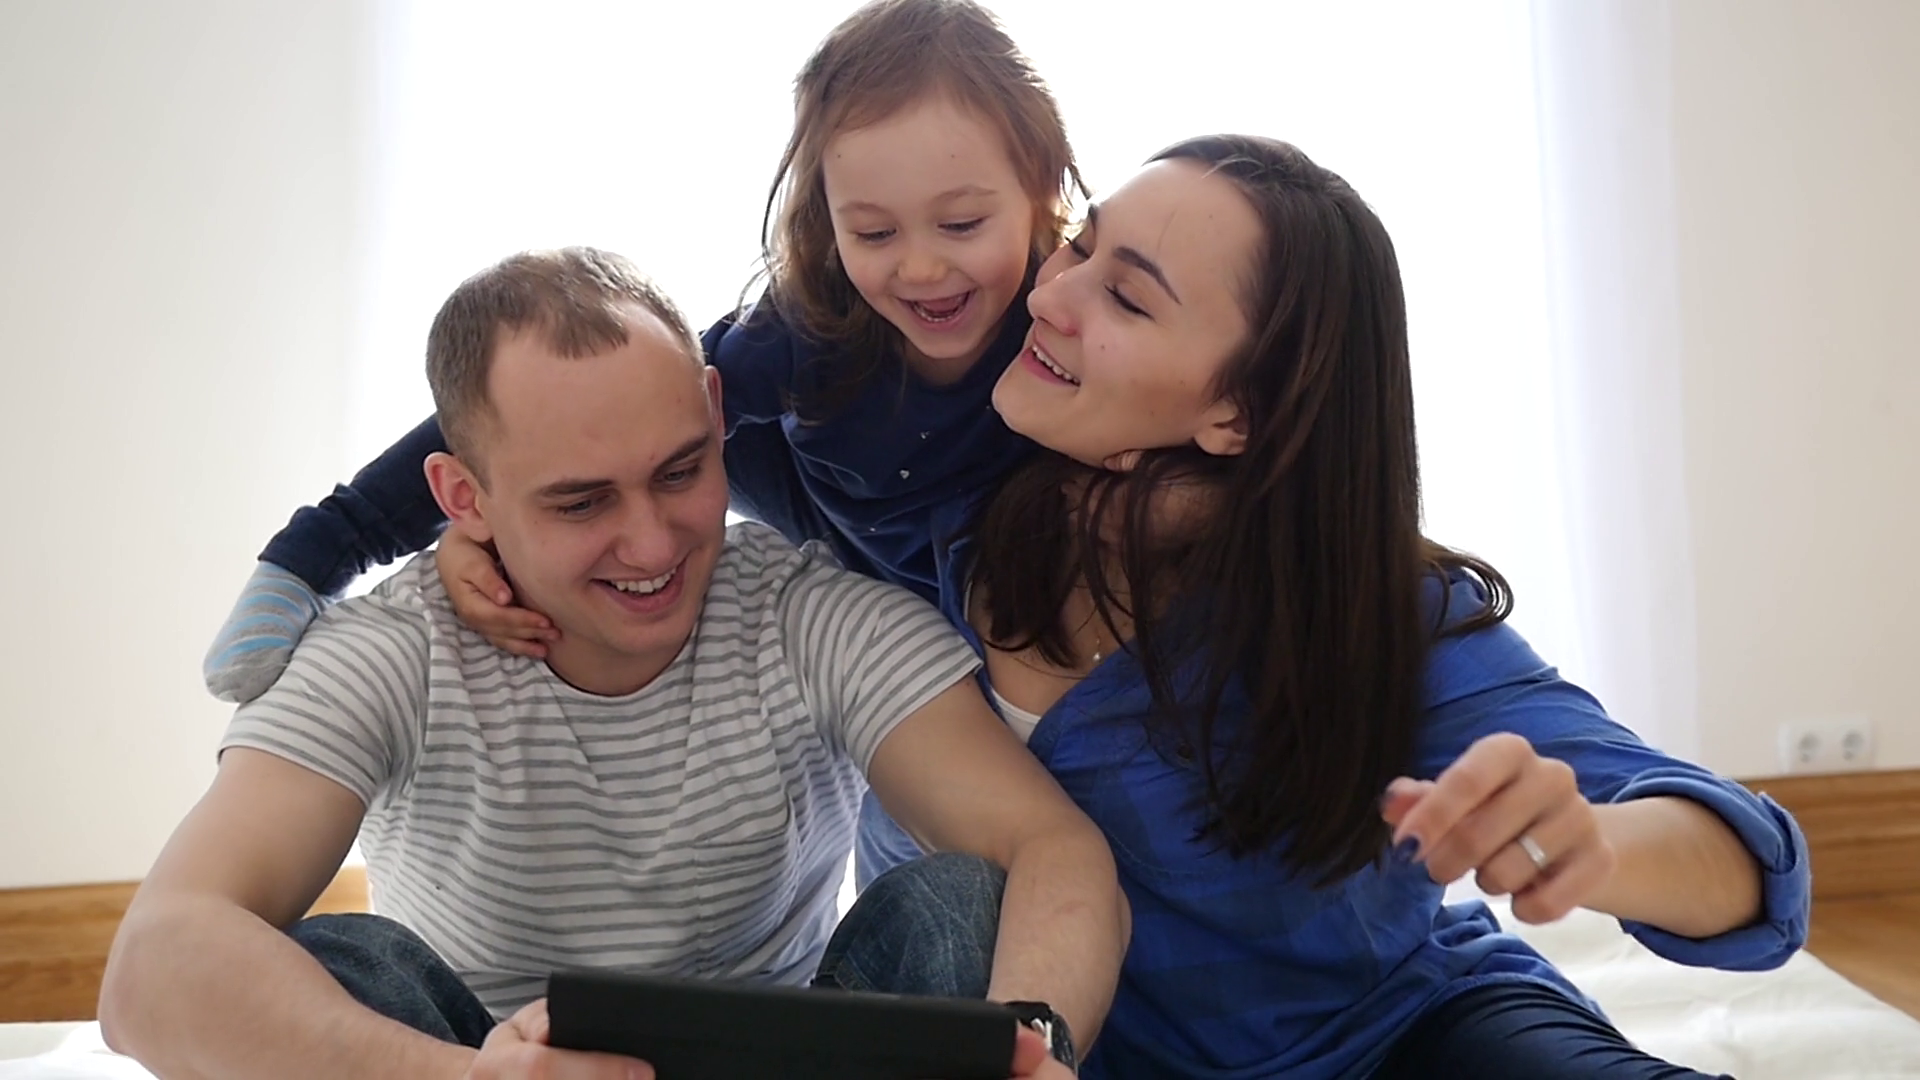 Happy Family Idyll Couple With Tablet Hug Their Playful Little Child ...